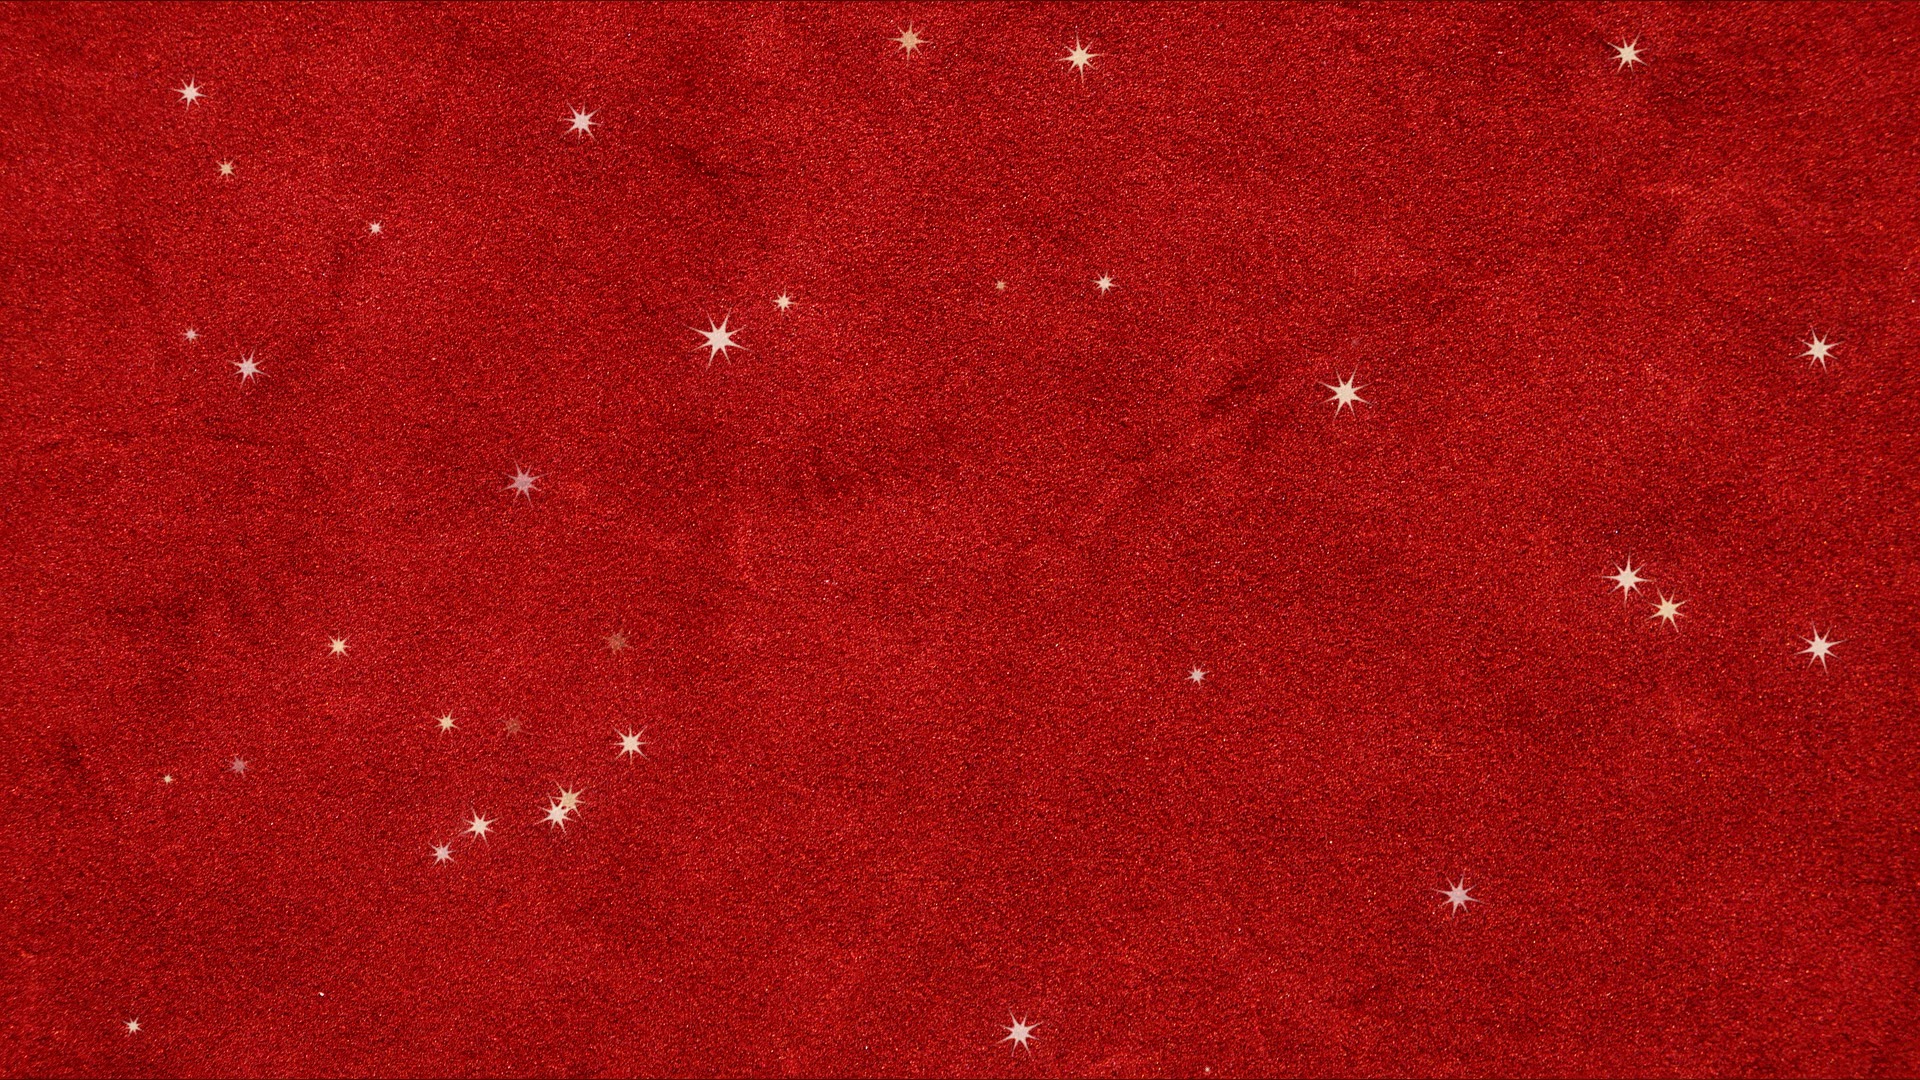 Lots of stars background videos can be looped on a red velvet cloth